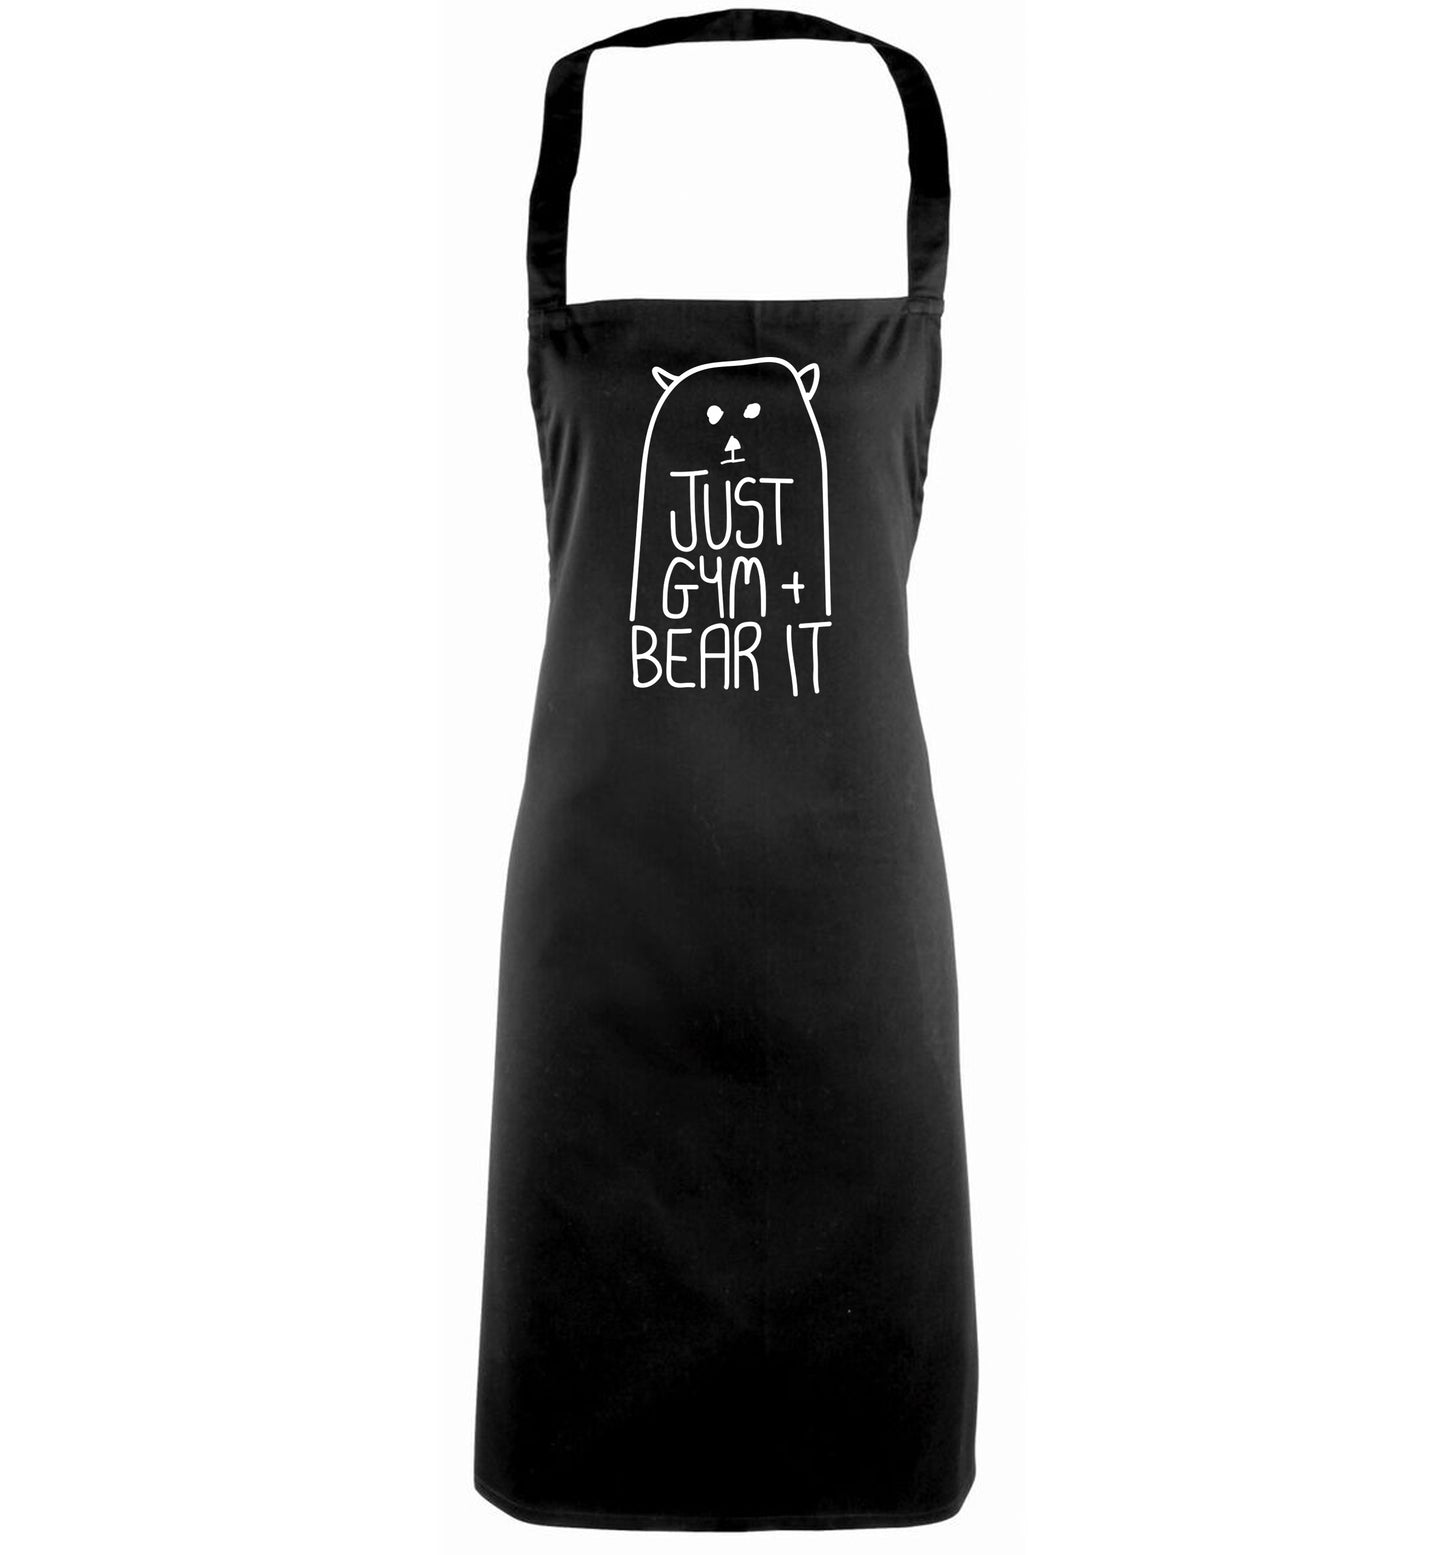 Just gym and bear it black apron